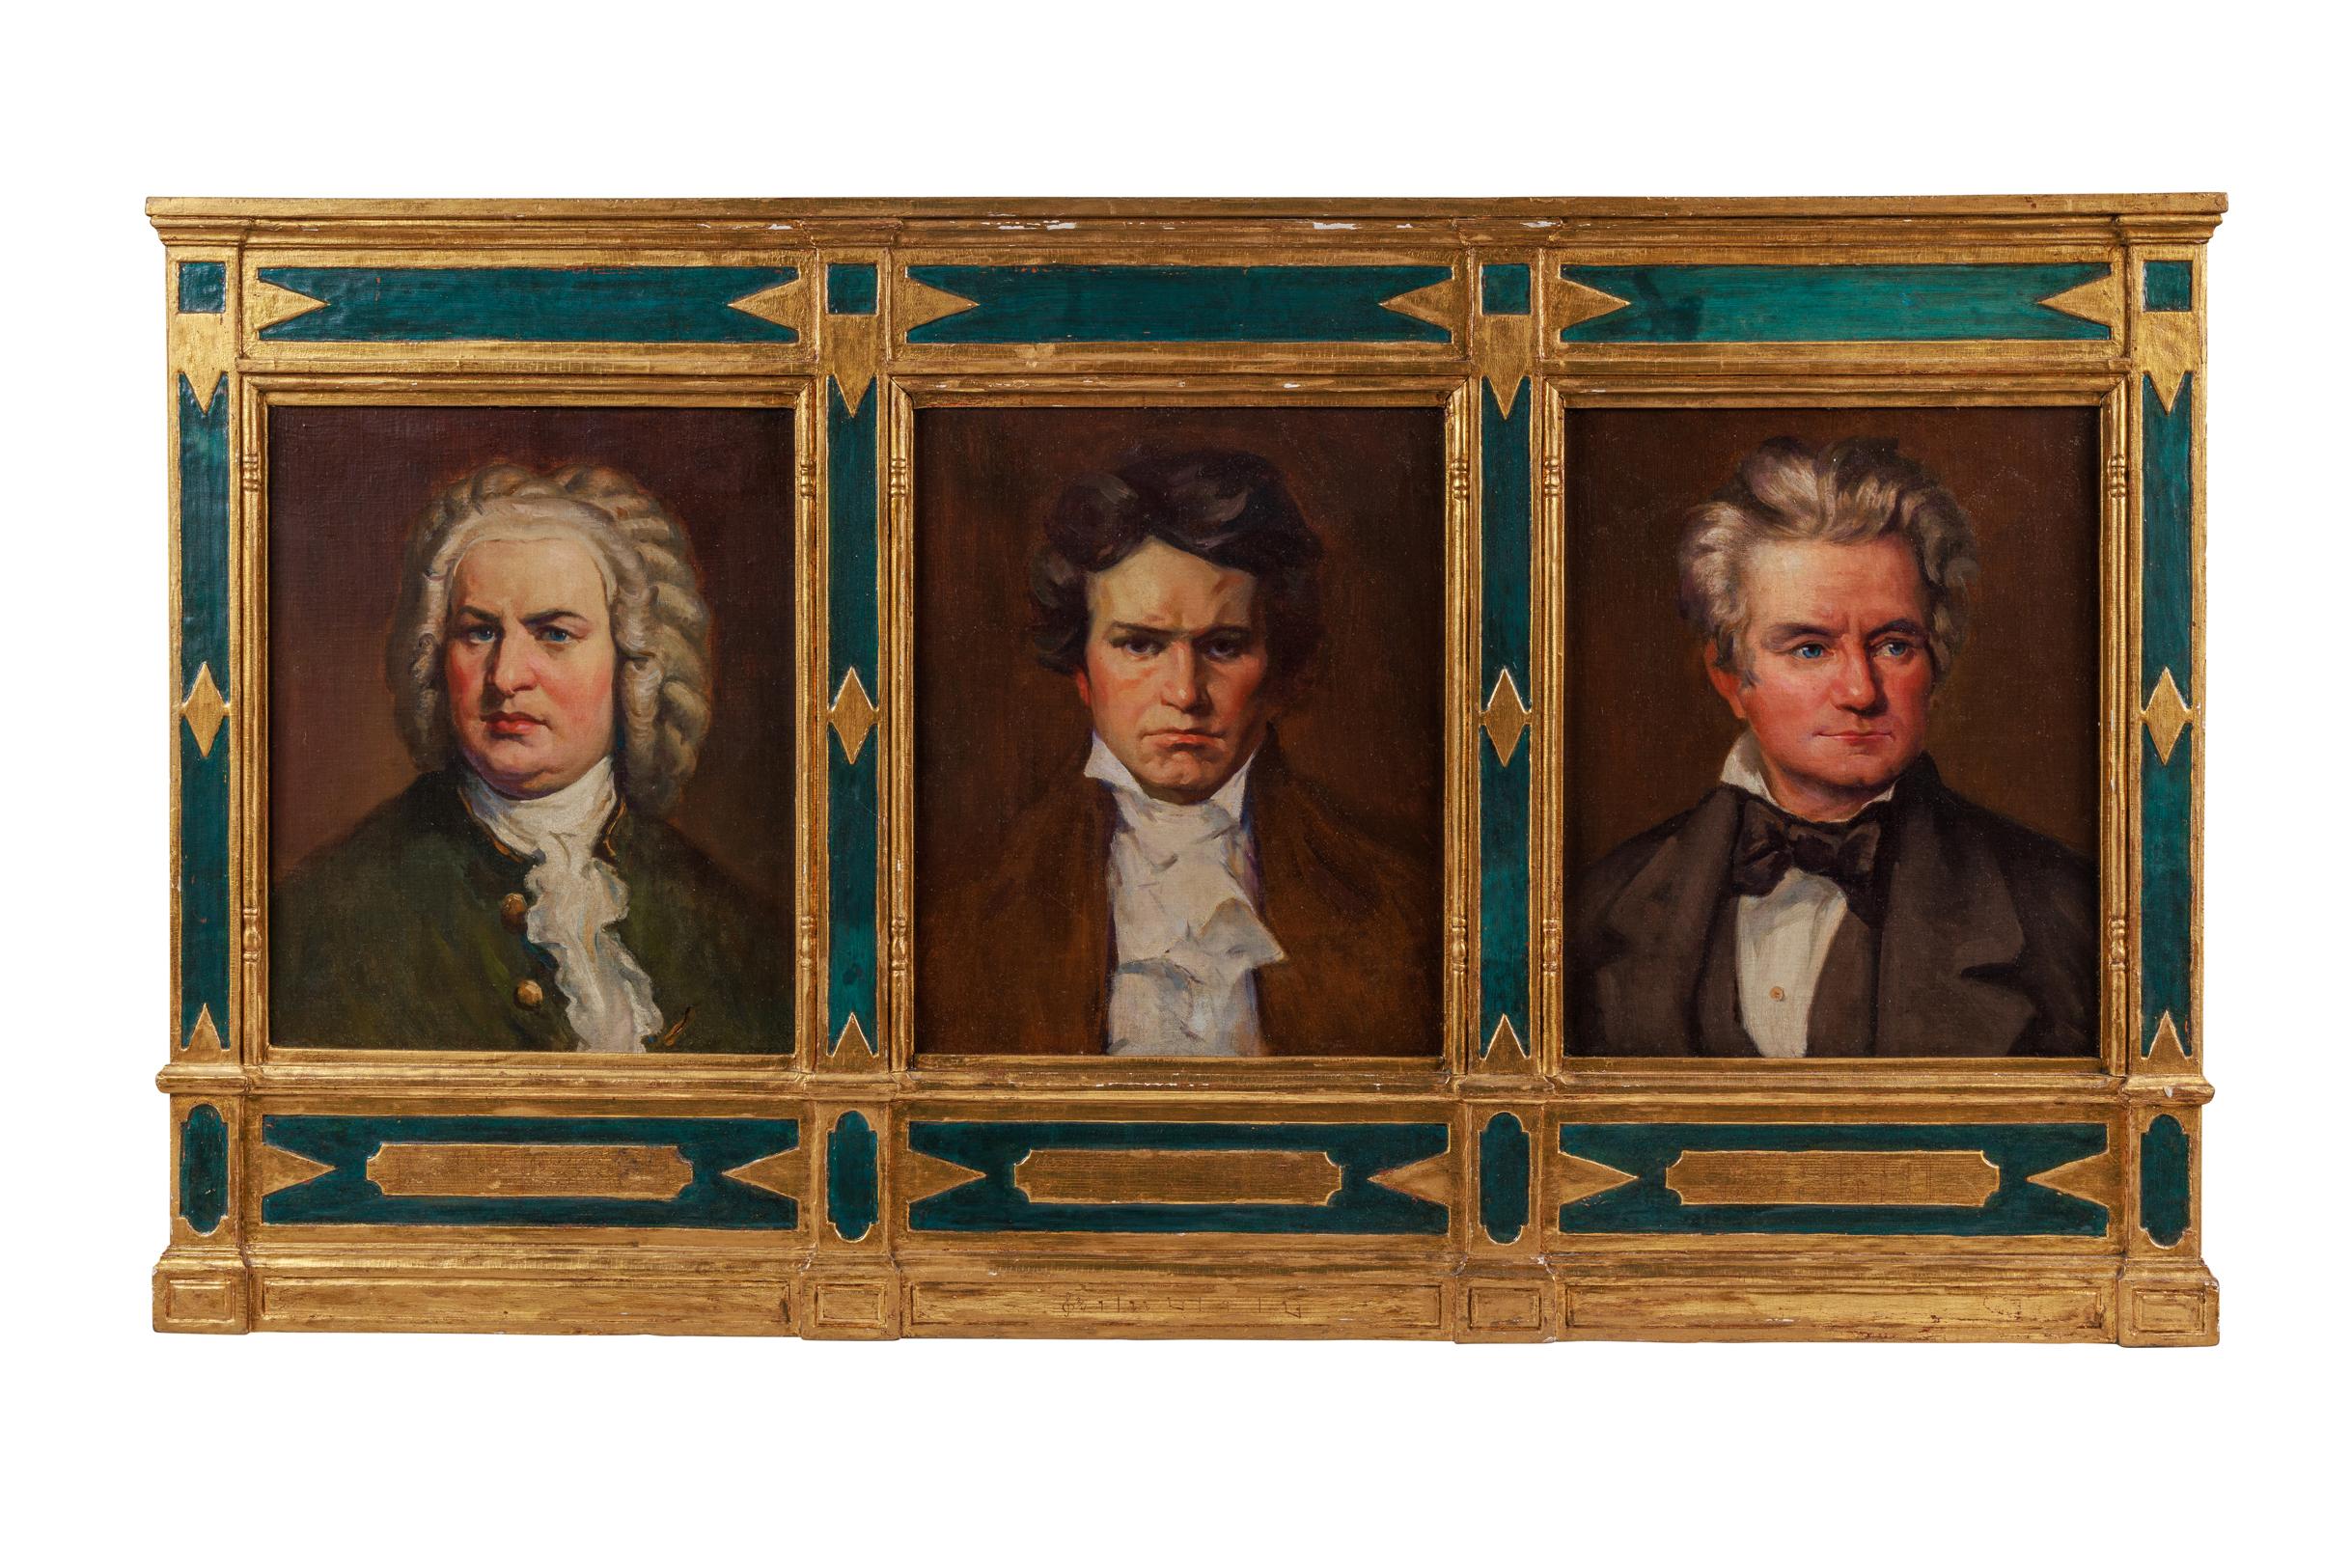 Unknown Portrait Painting - "The Three B's of Music" Beethoven, Bach, & Brahms, An Extremely Rare Painting 